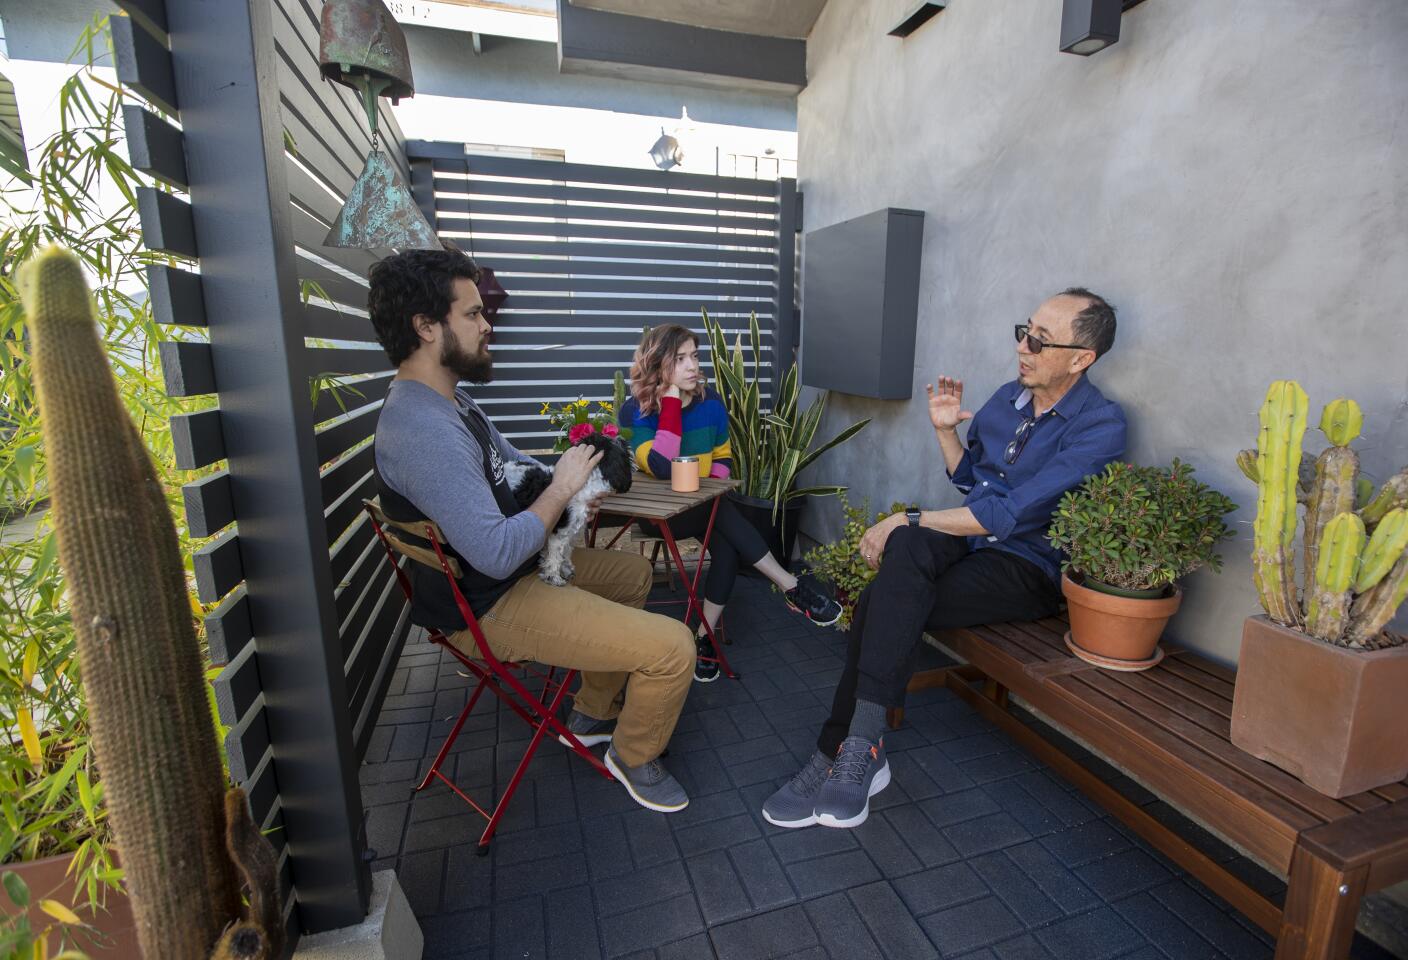 Two men and a woman sit in a small patio.